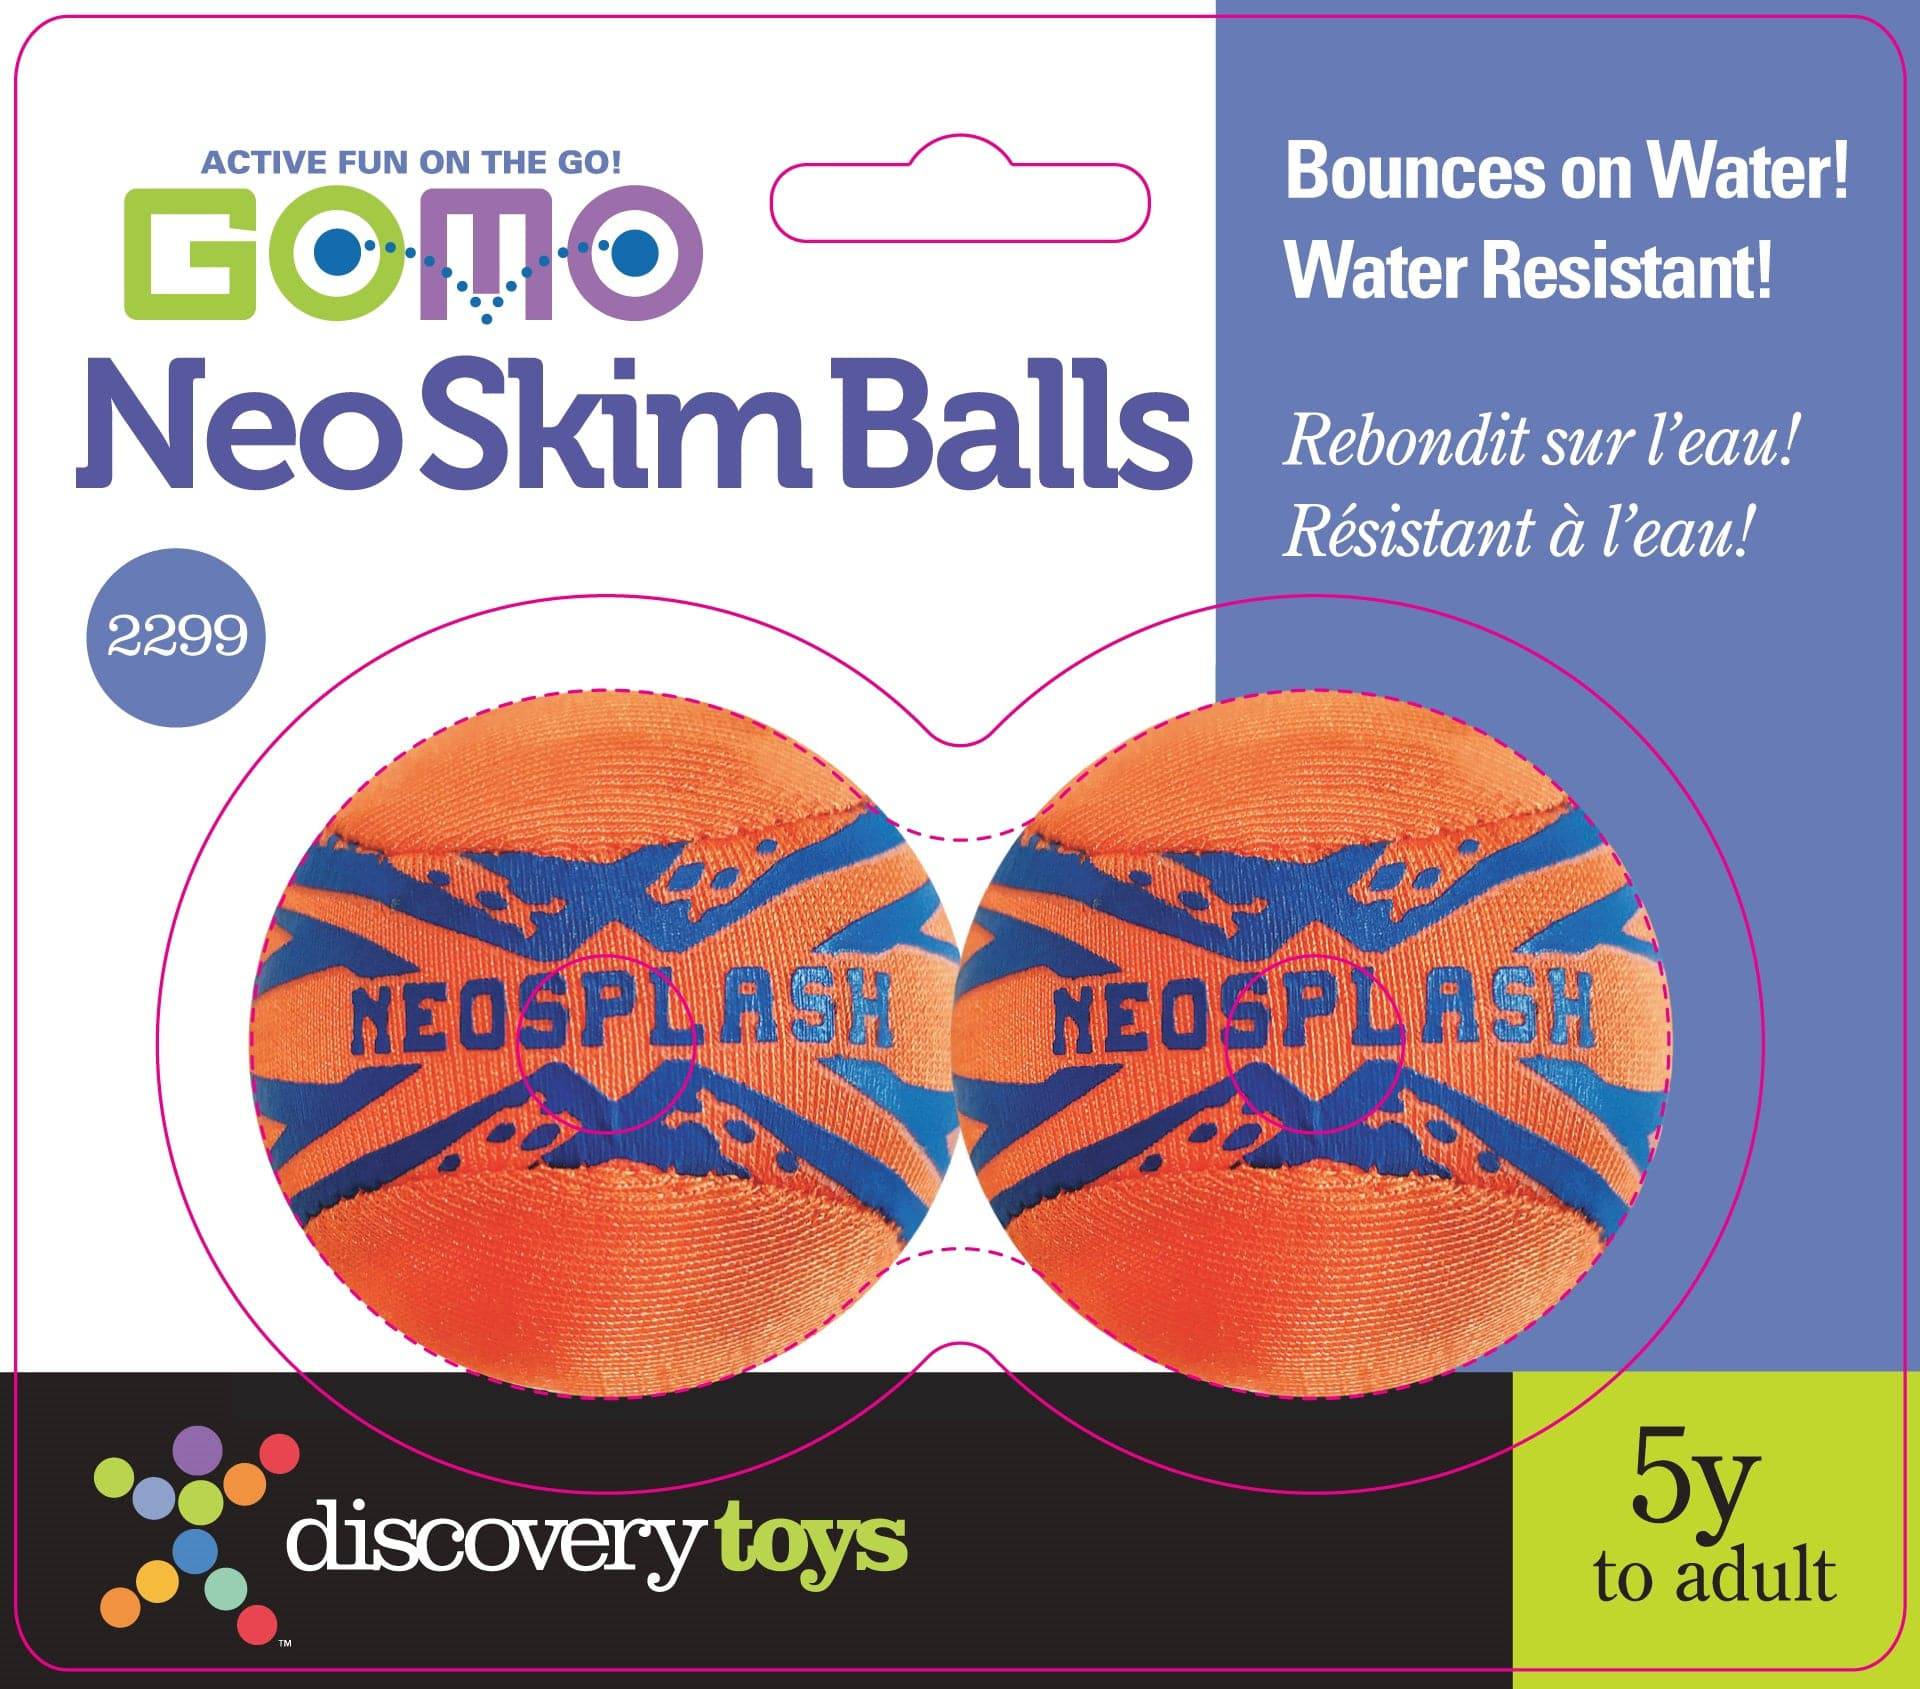 GO-MO NEO SKIM BALLS Family Water Skipping Outdoor Backyard Summer Toy - Discovery Toys